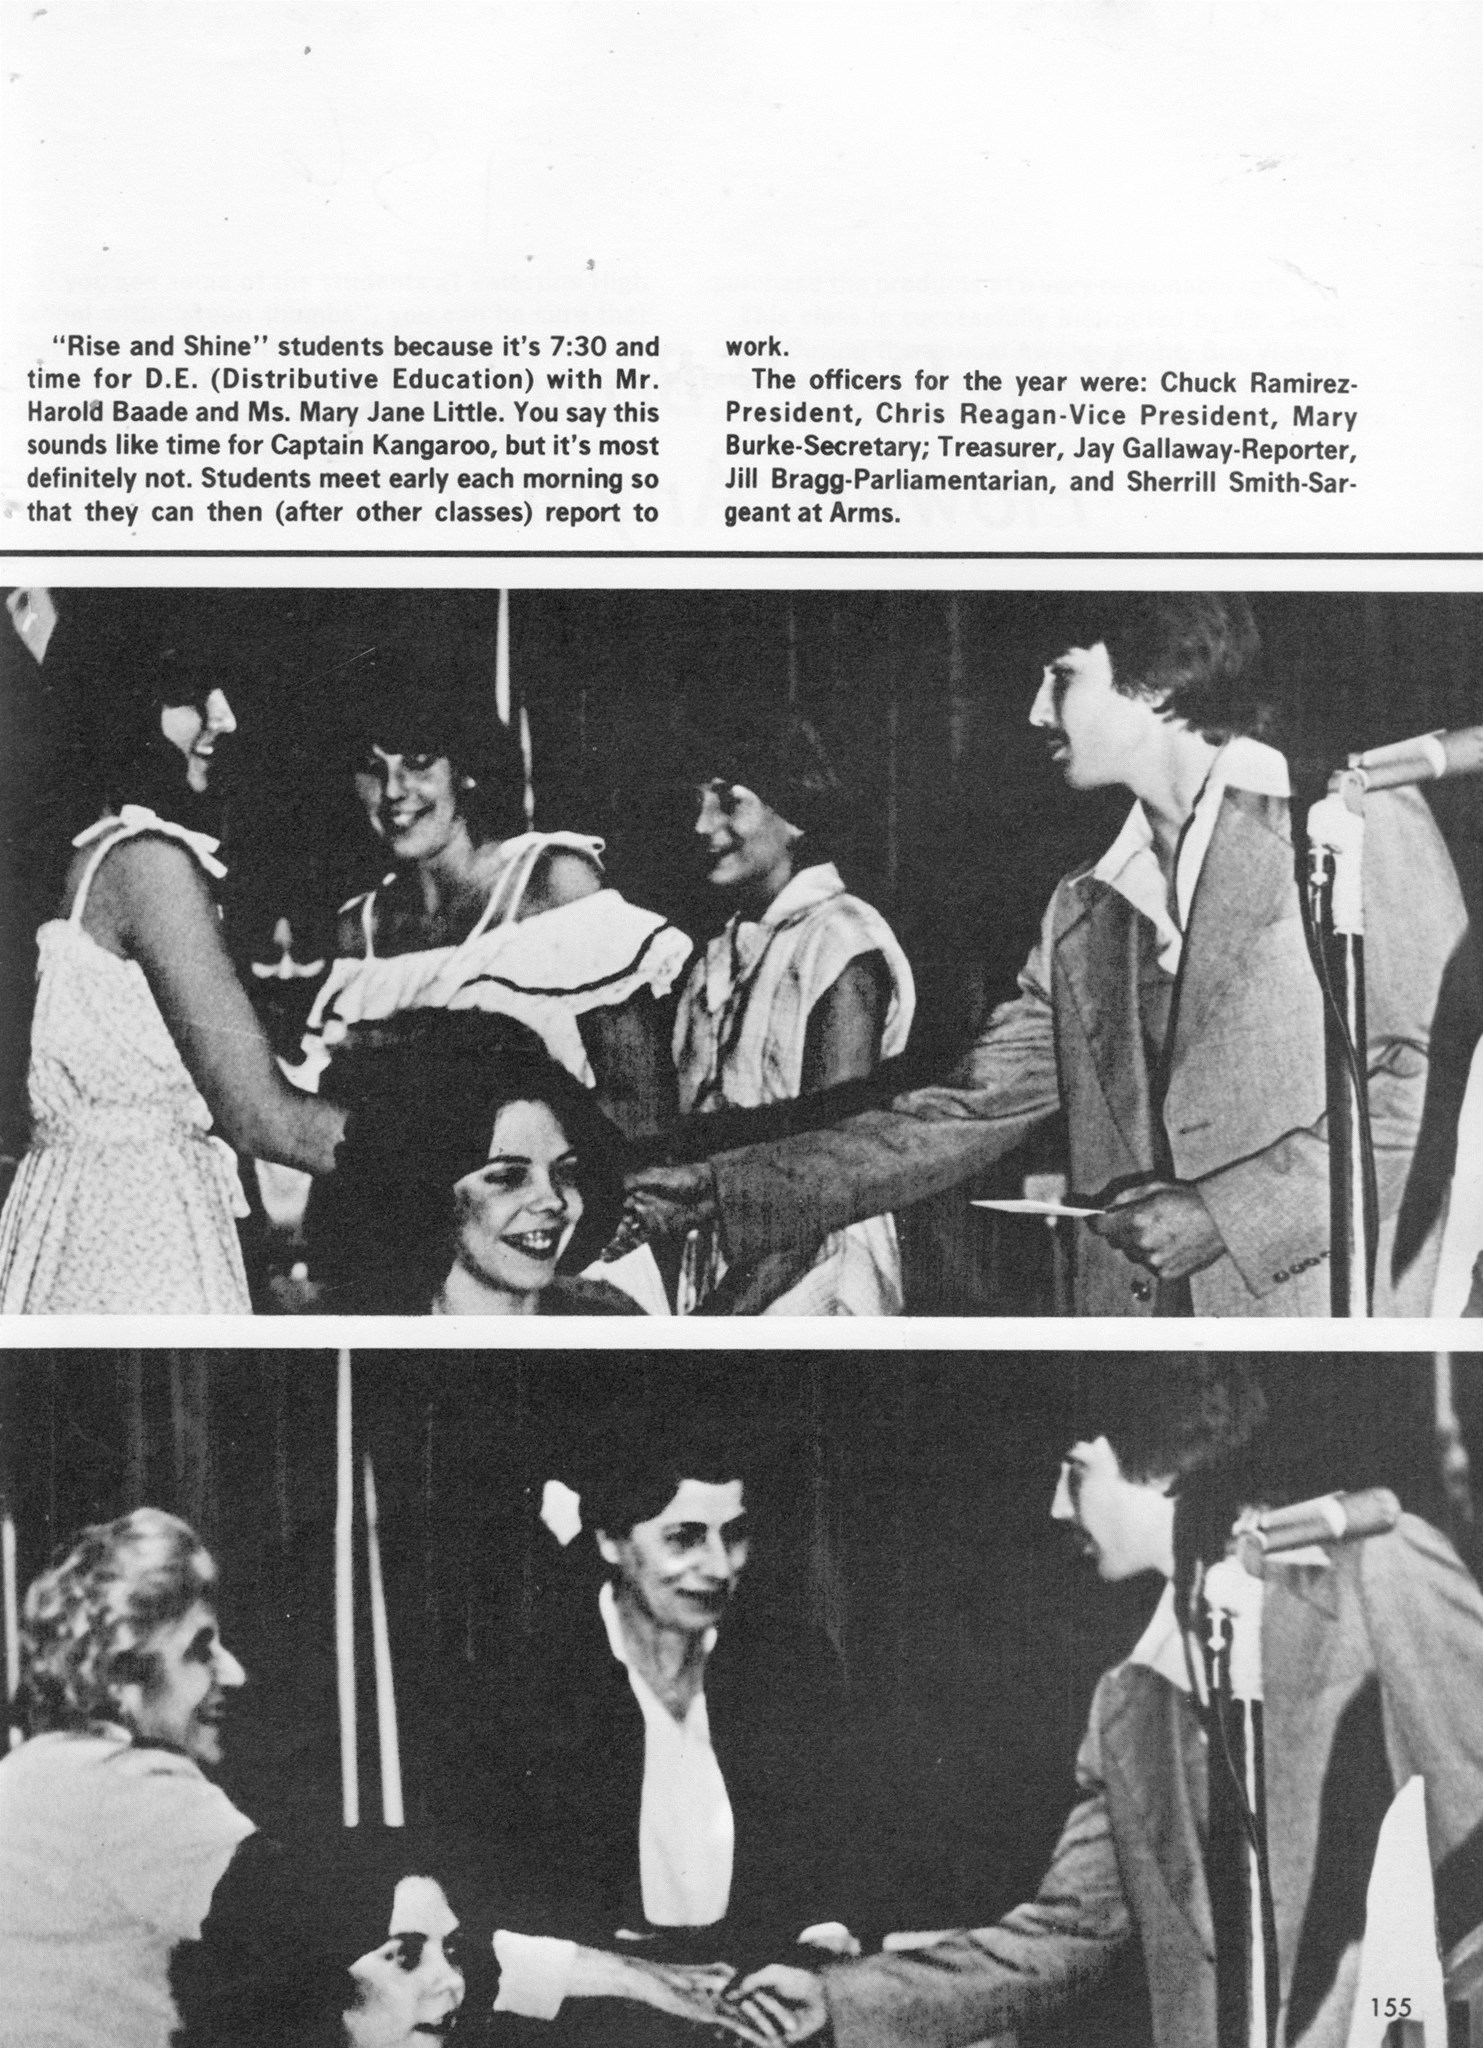 ../../../Images/Large/1980/Arclight-1980-pg0155.jpg